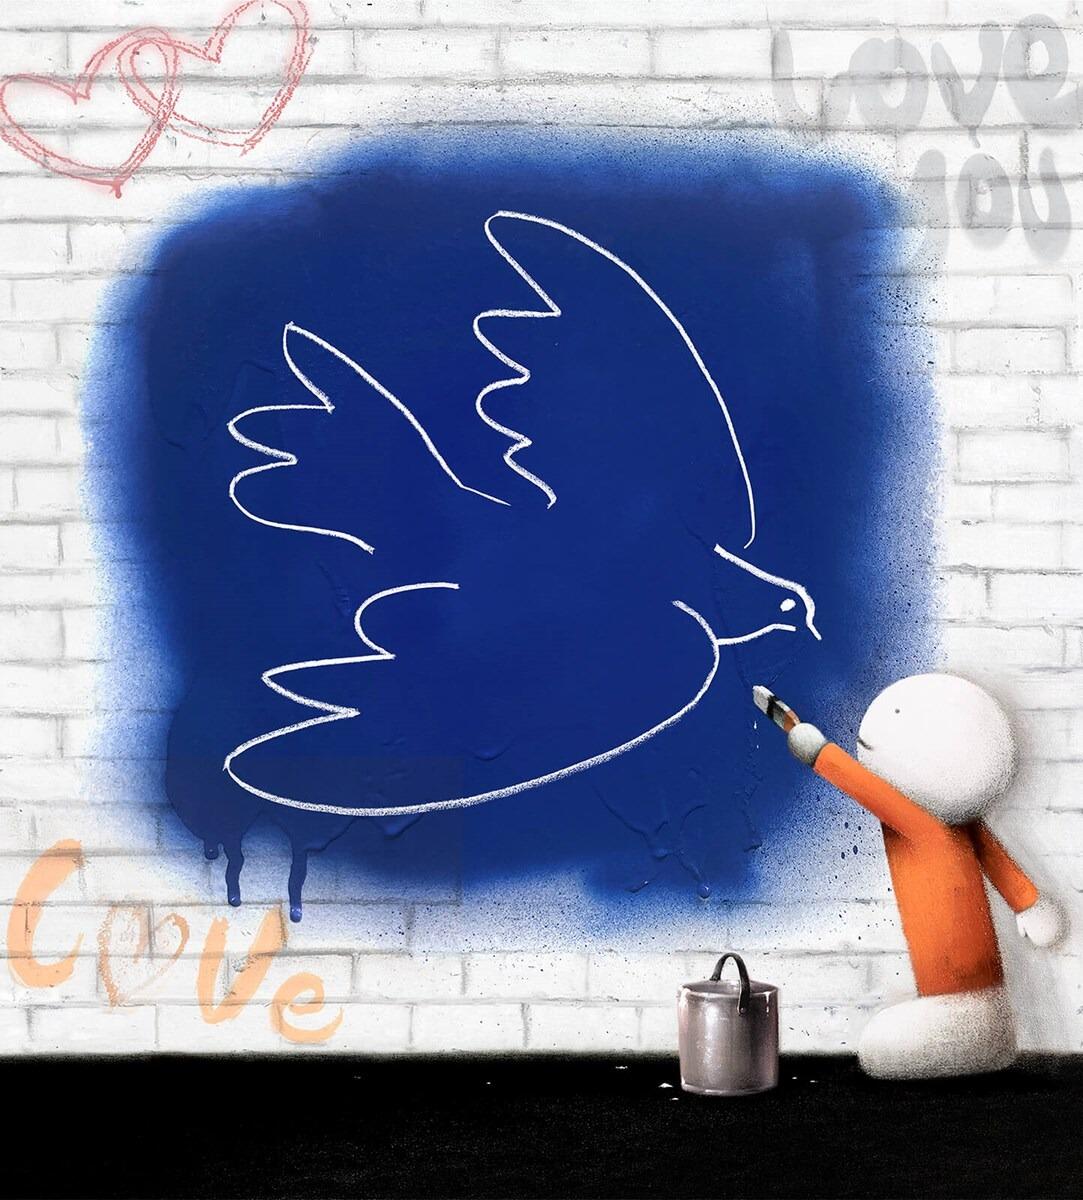 Peace of Art by Doug Hyde - Limited Edition art print ZHYD774